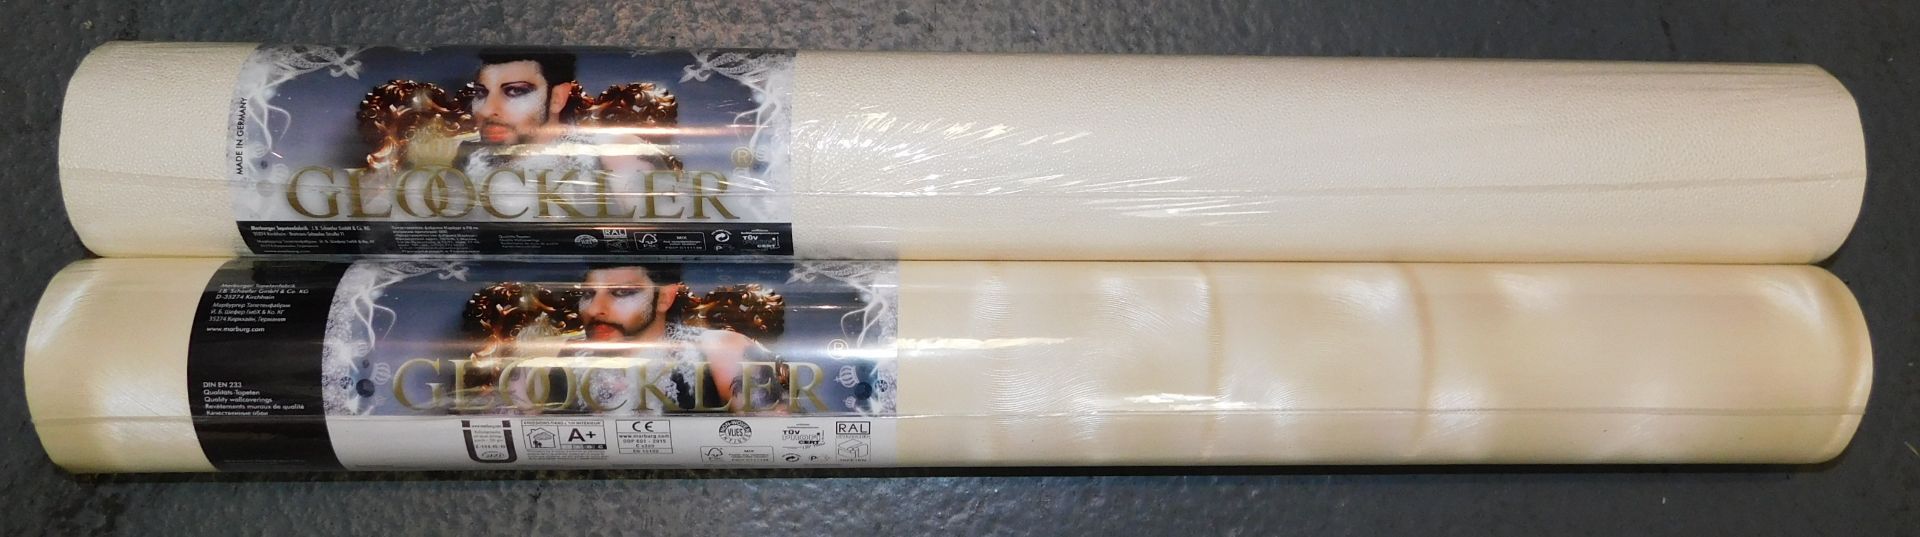 15 Rolls of Ultra II Wallpaper (9 x 52566, 6 x 52528) (Library Images – Some Colours May Not Be - Image 2 of 4